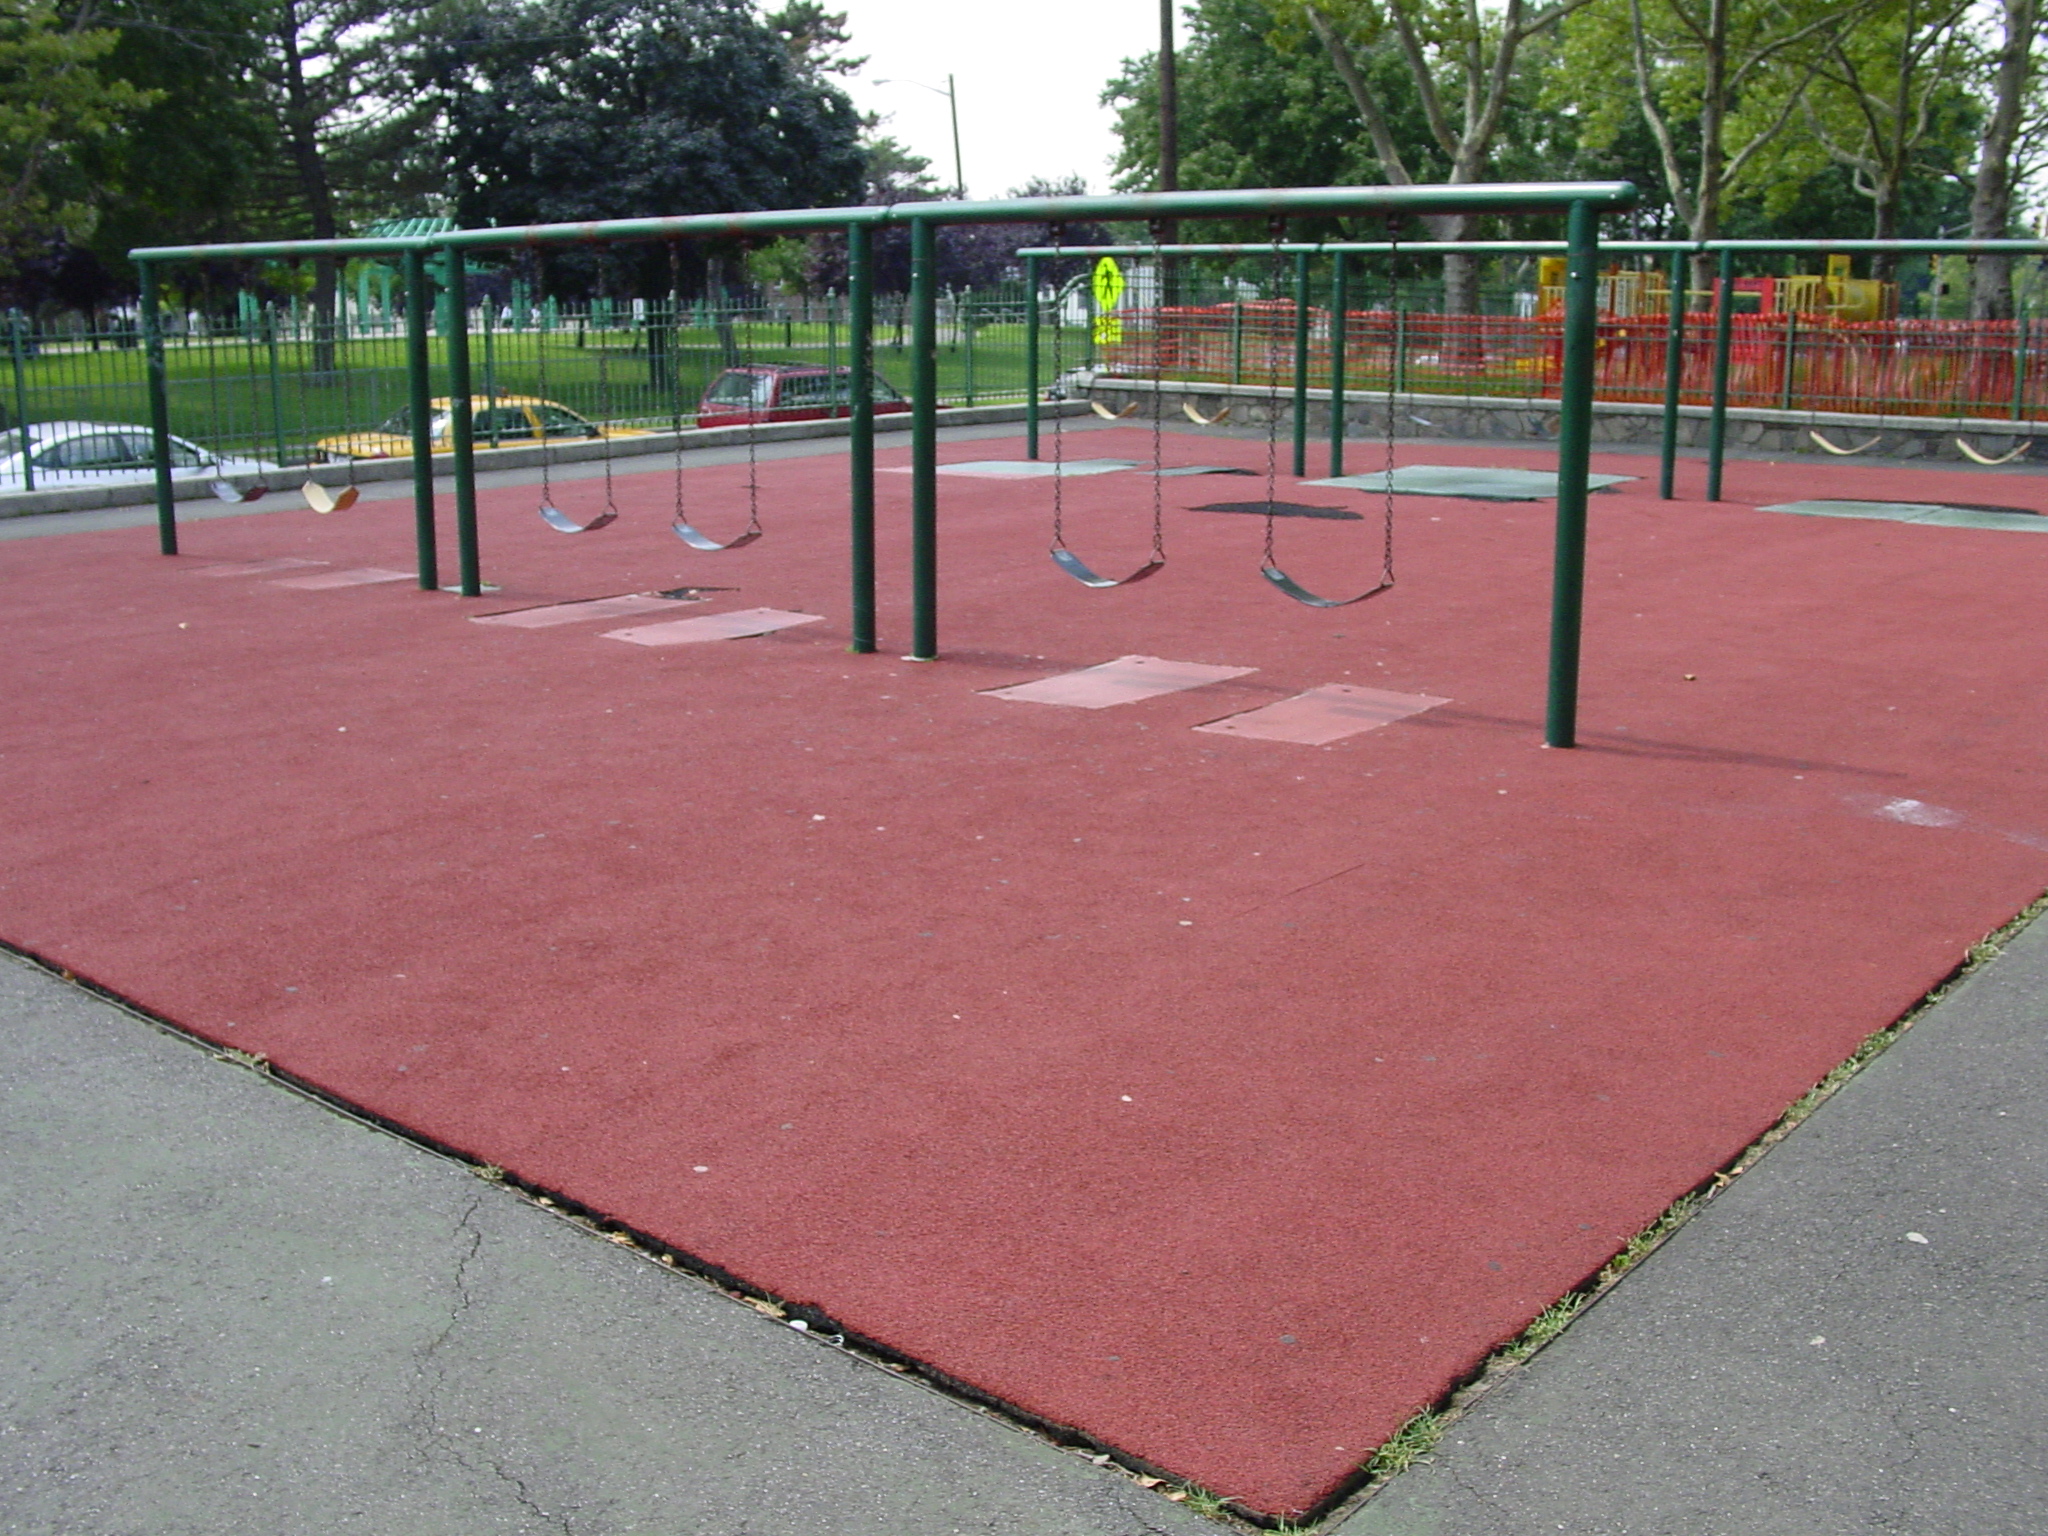 Large Public Park with Multiple Playgrounds Using Designs s